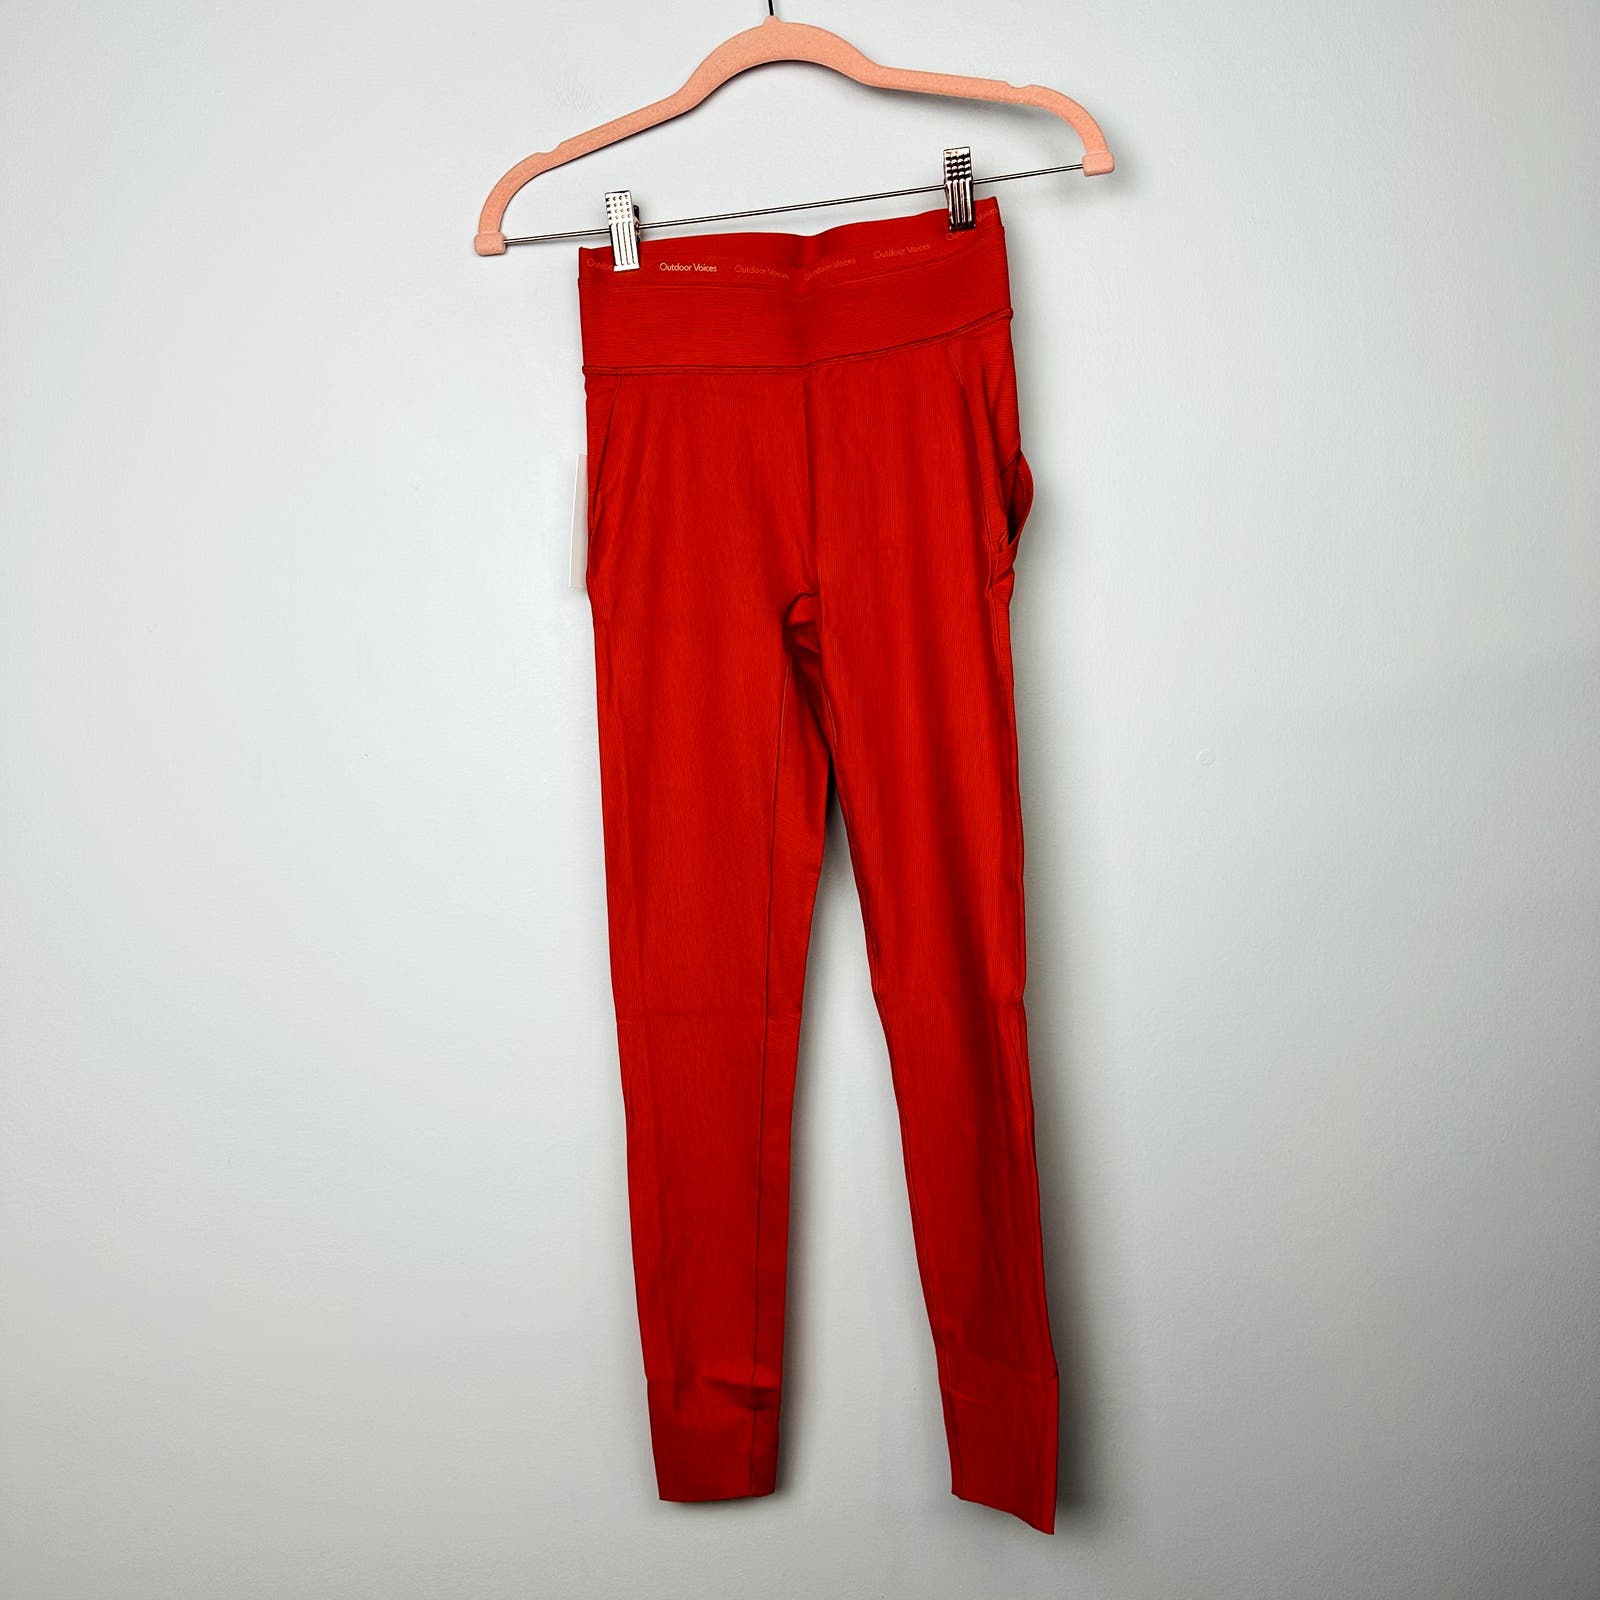 Outdoor Voices NWT Paprika High Waist TechSweat Thrive 7/8 Leggings Size XS